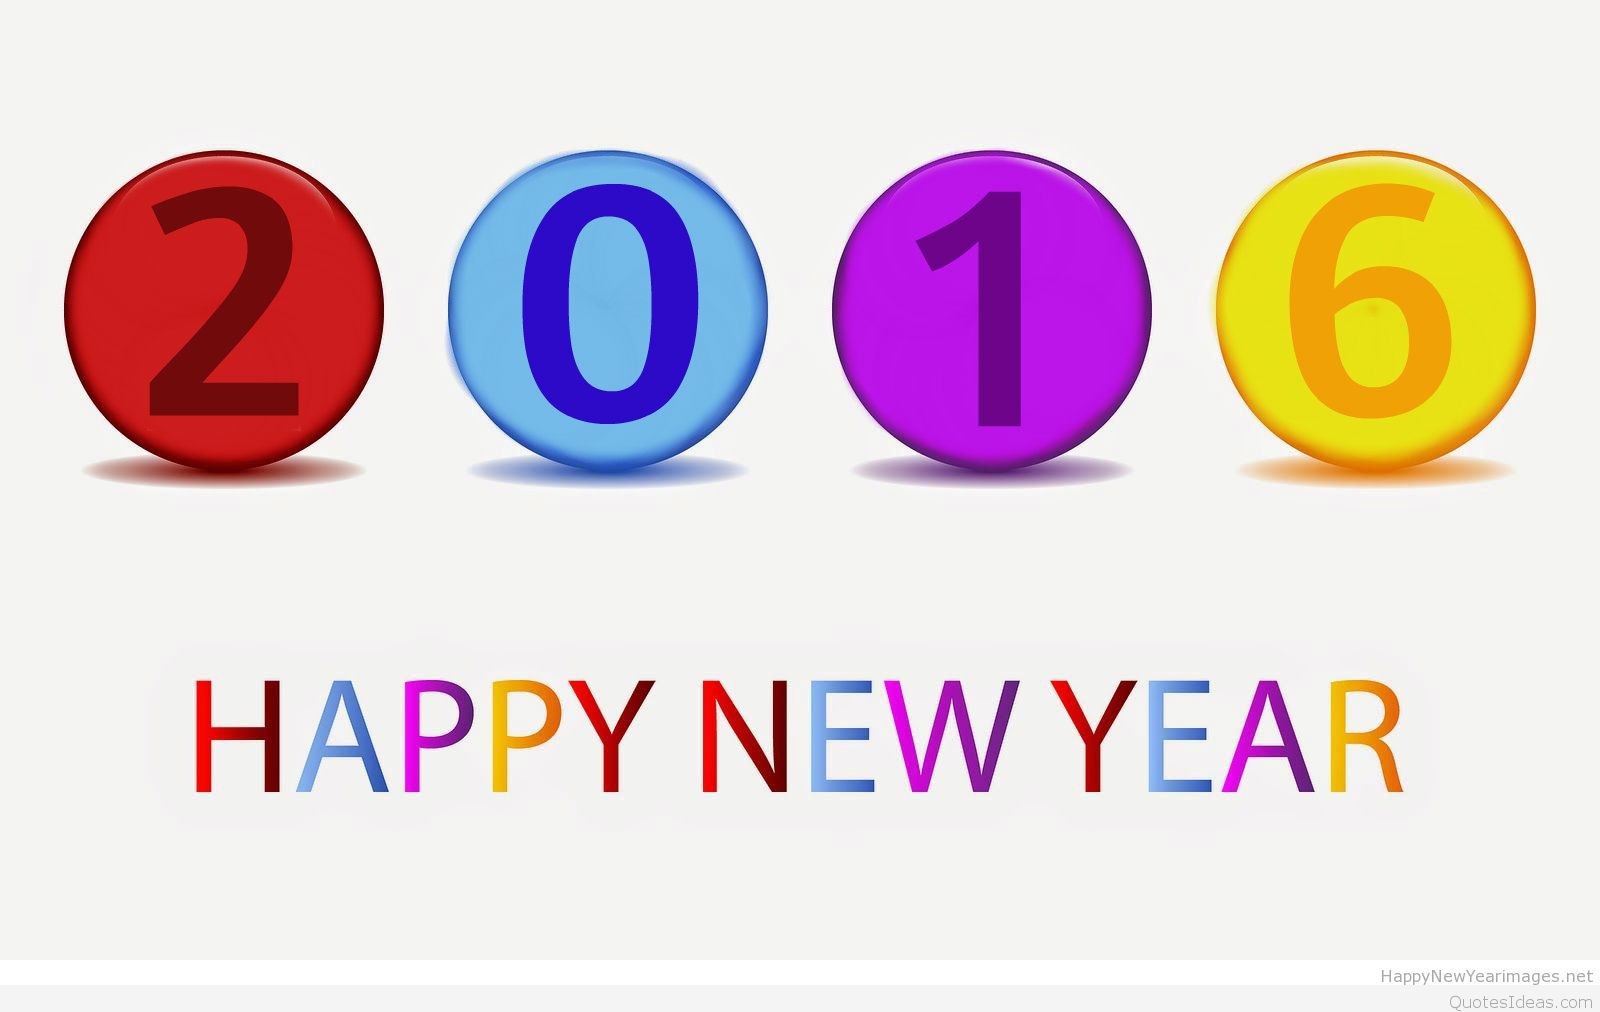 Happy new year 6 clipart clipartfest